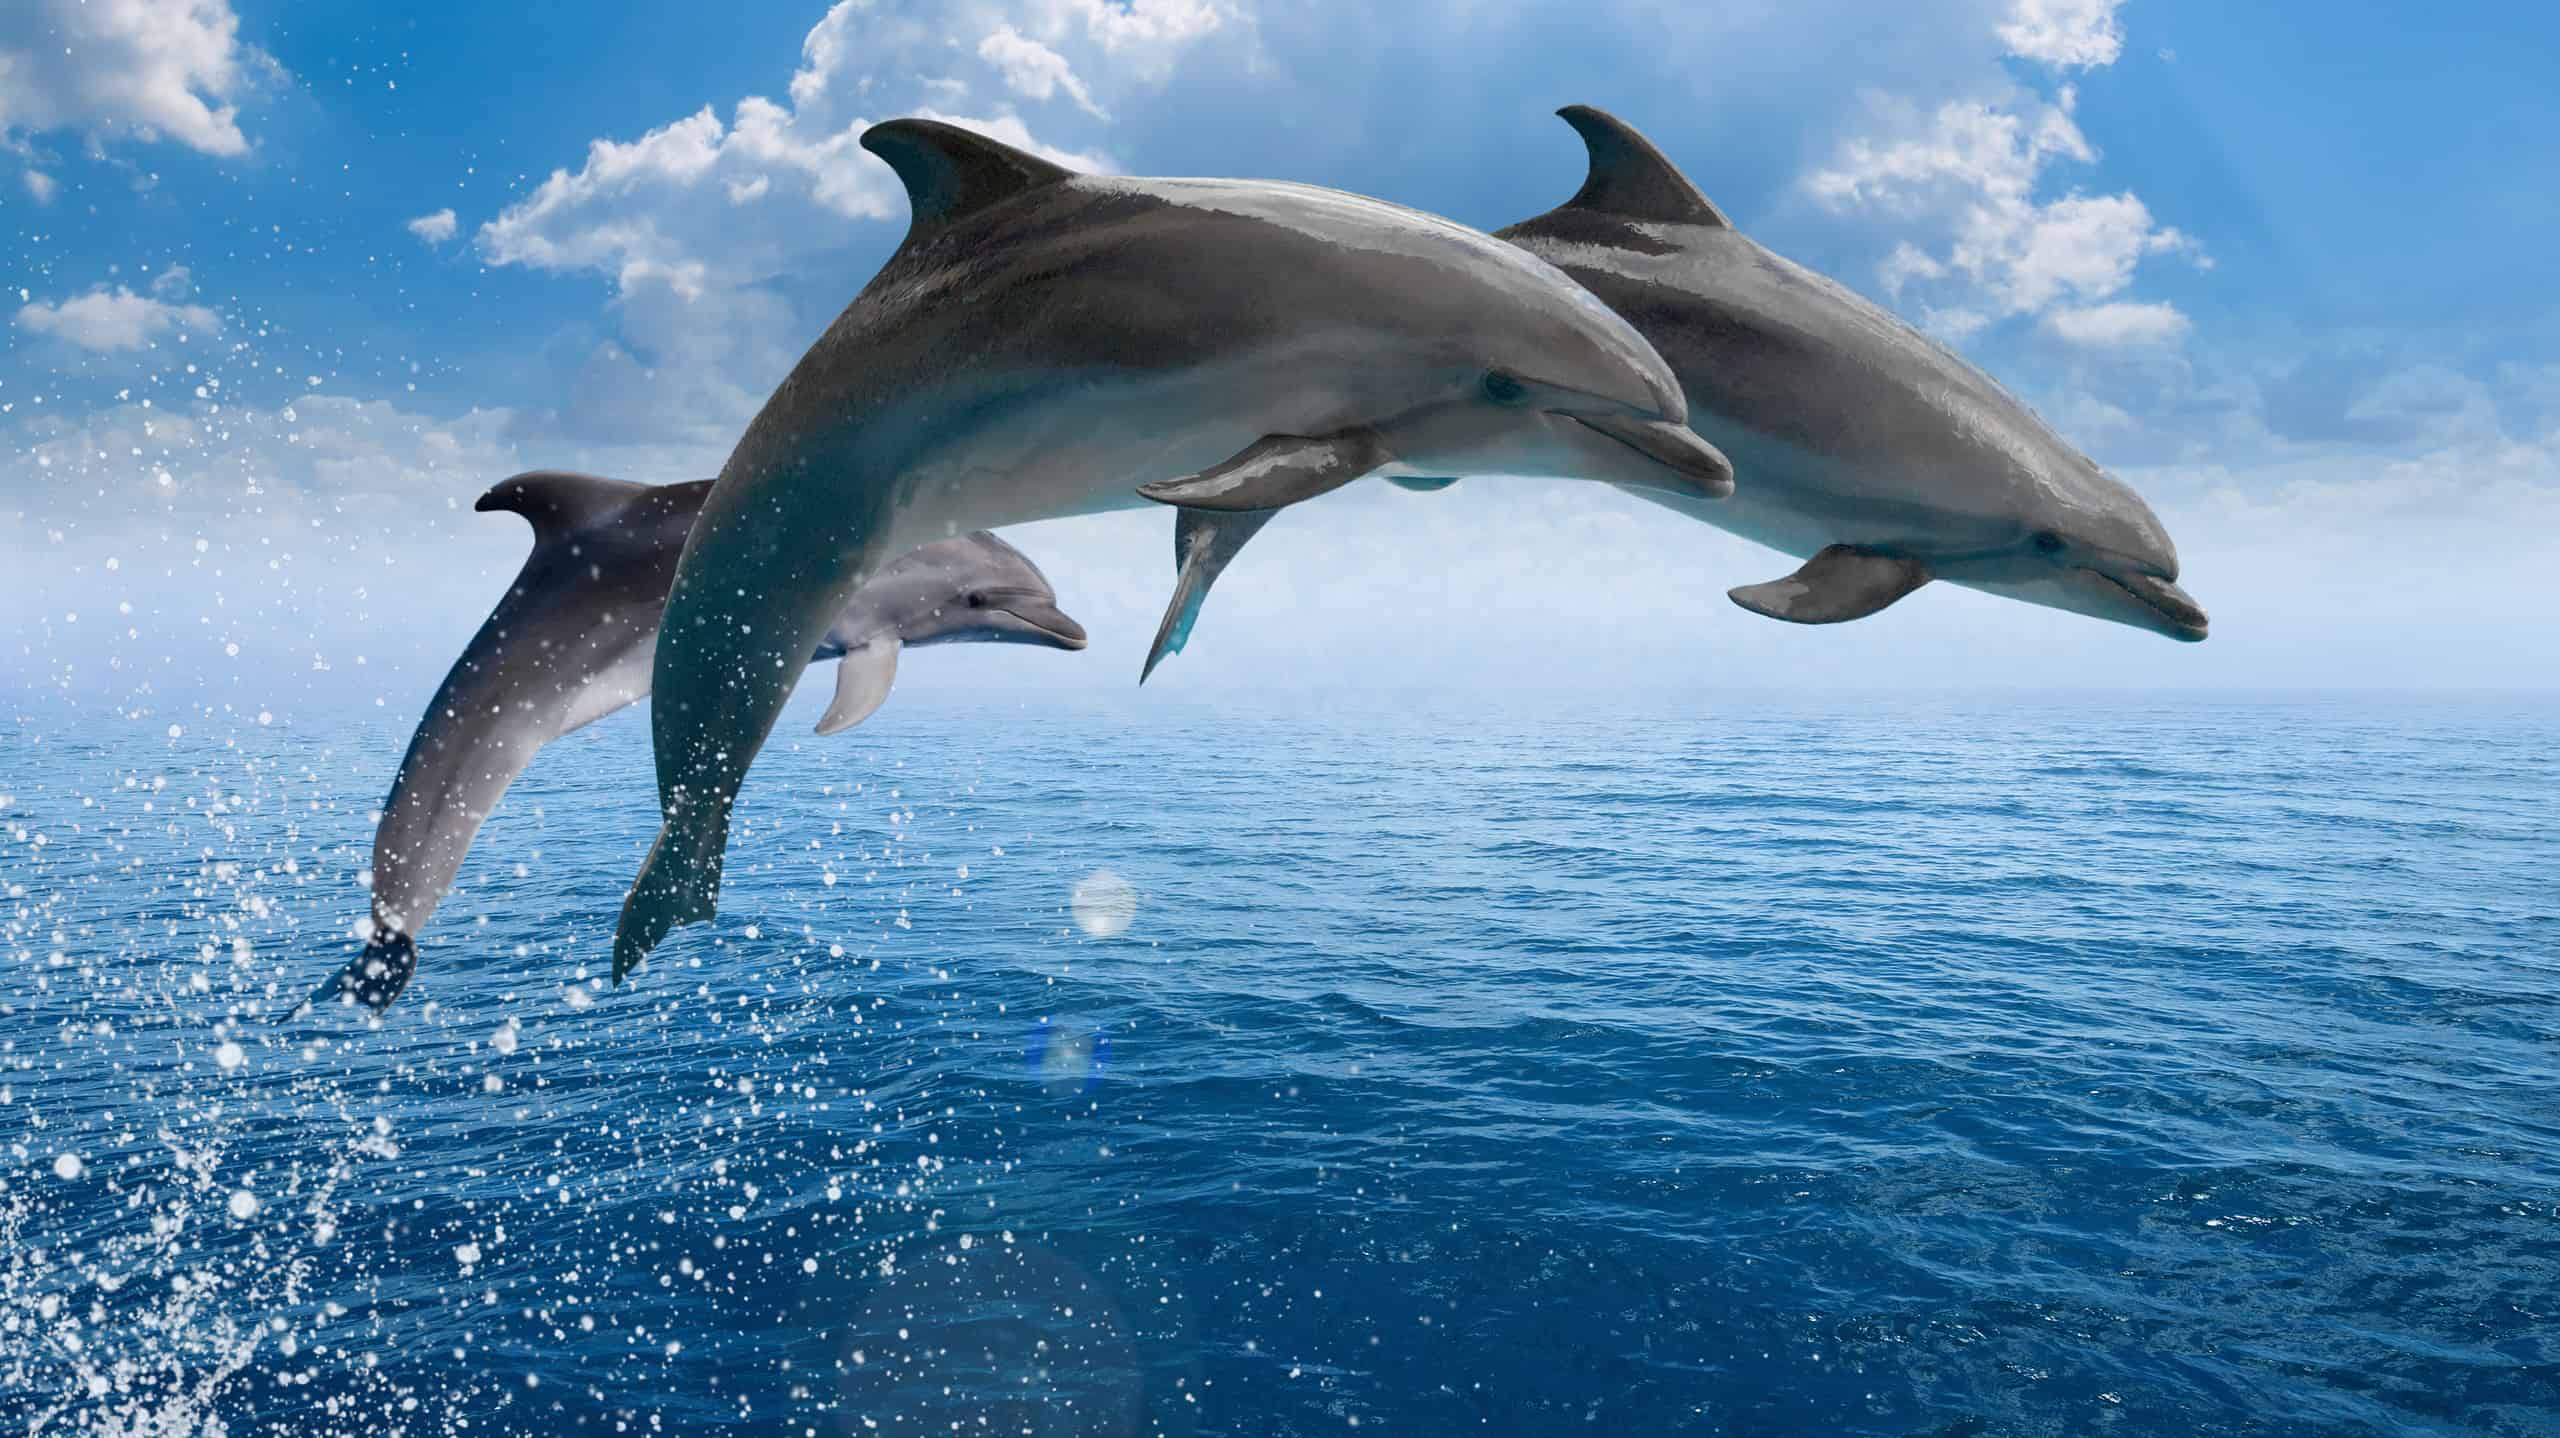 Three Marine wildlife background - dolphins jumping out of blue sea, seagulls fly high in blue sky with white clouds and bright sun